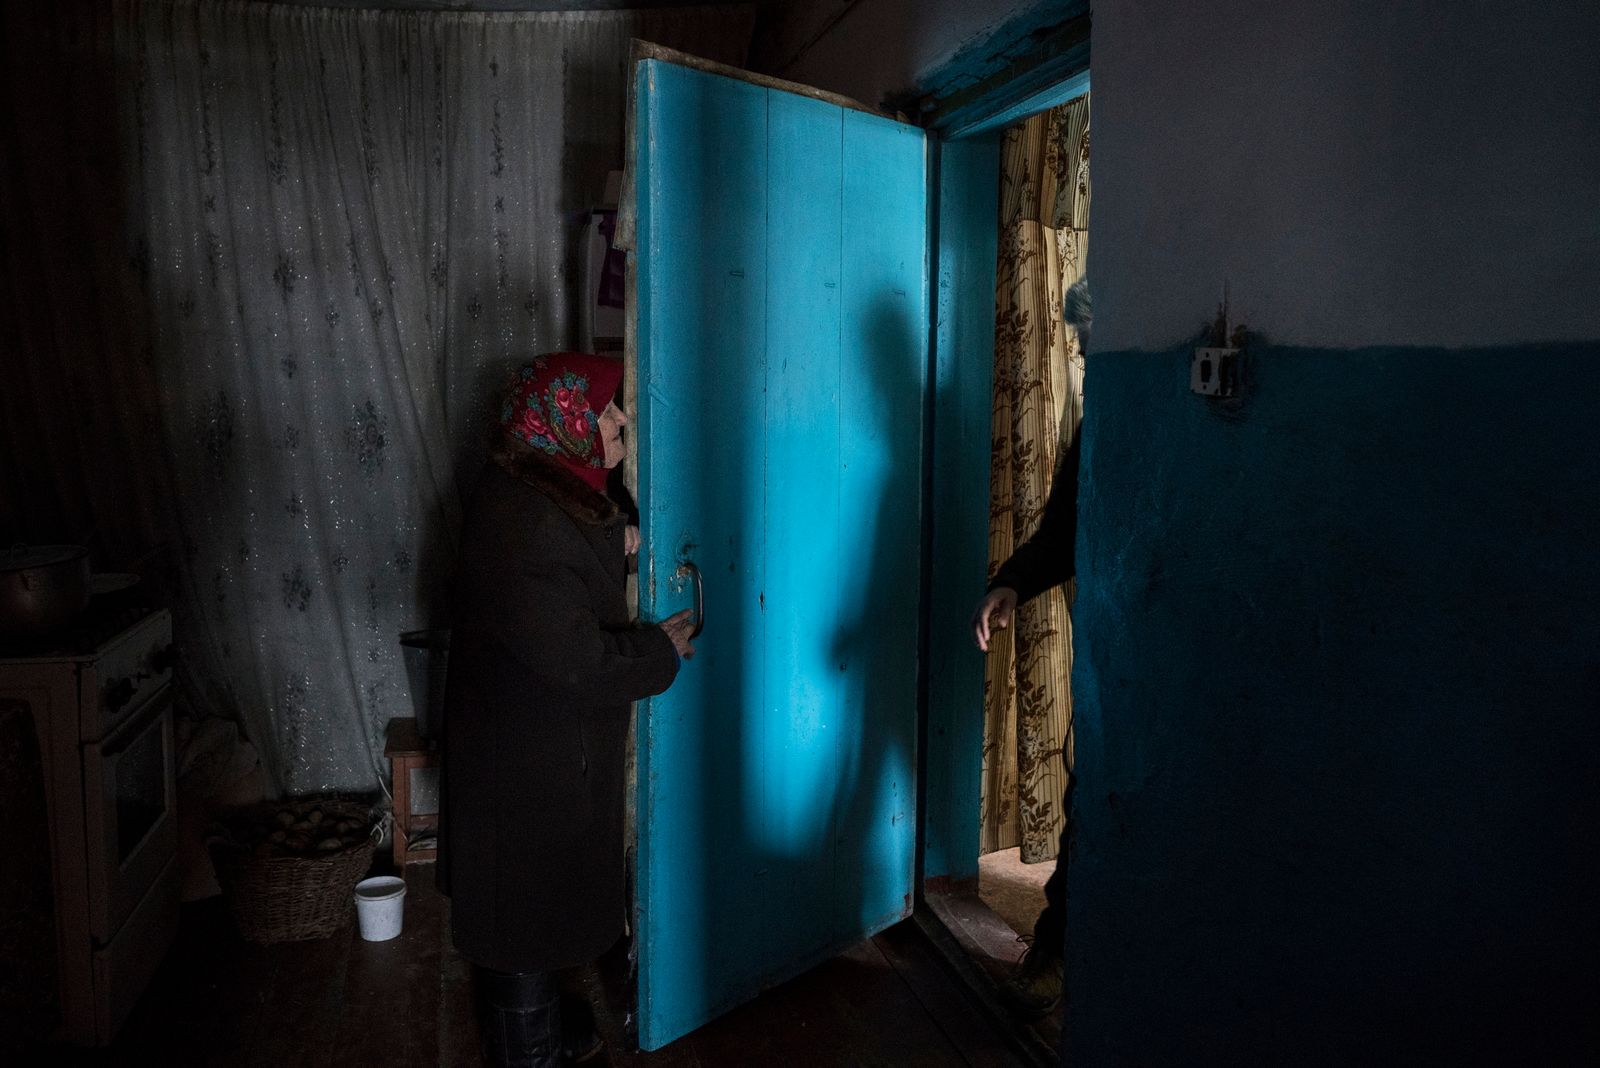 © Pierpaolo Mittica - Image from the The Zone, Life after death in Chernobyl photography project